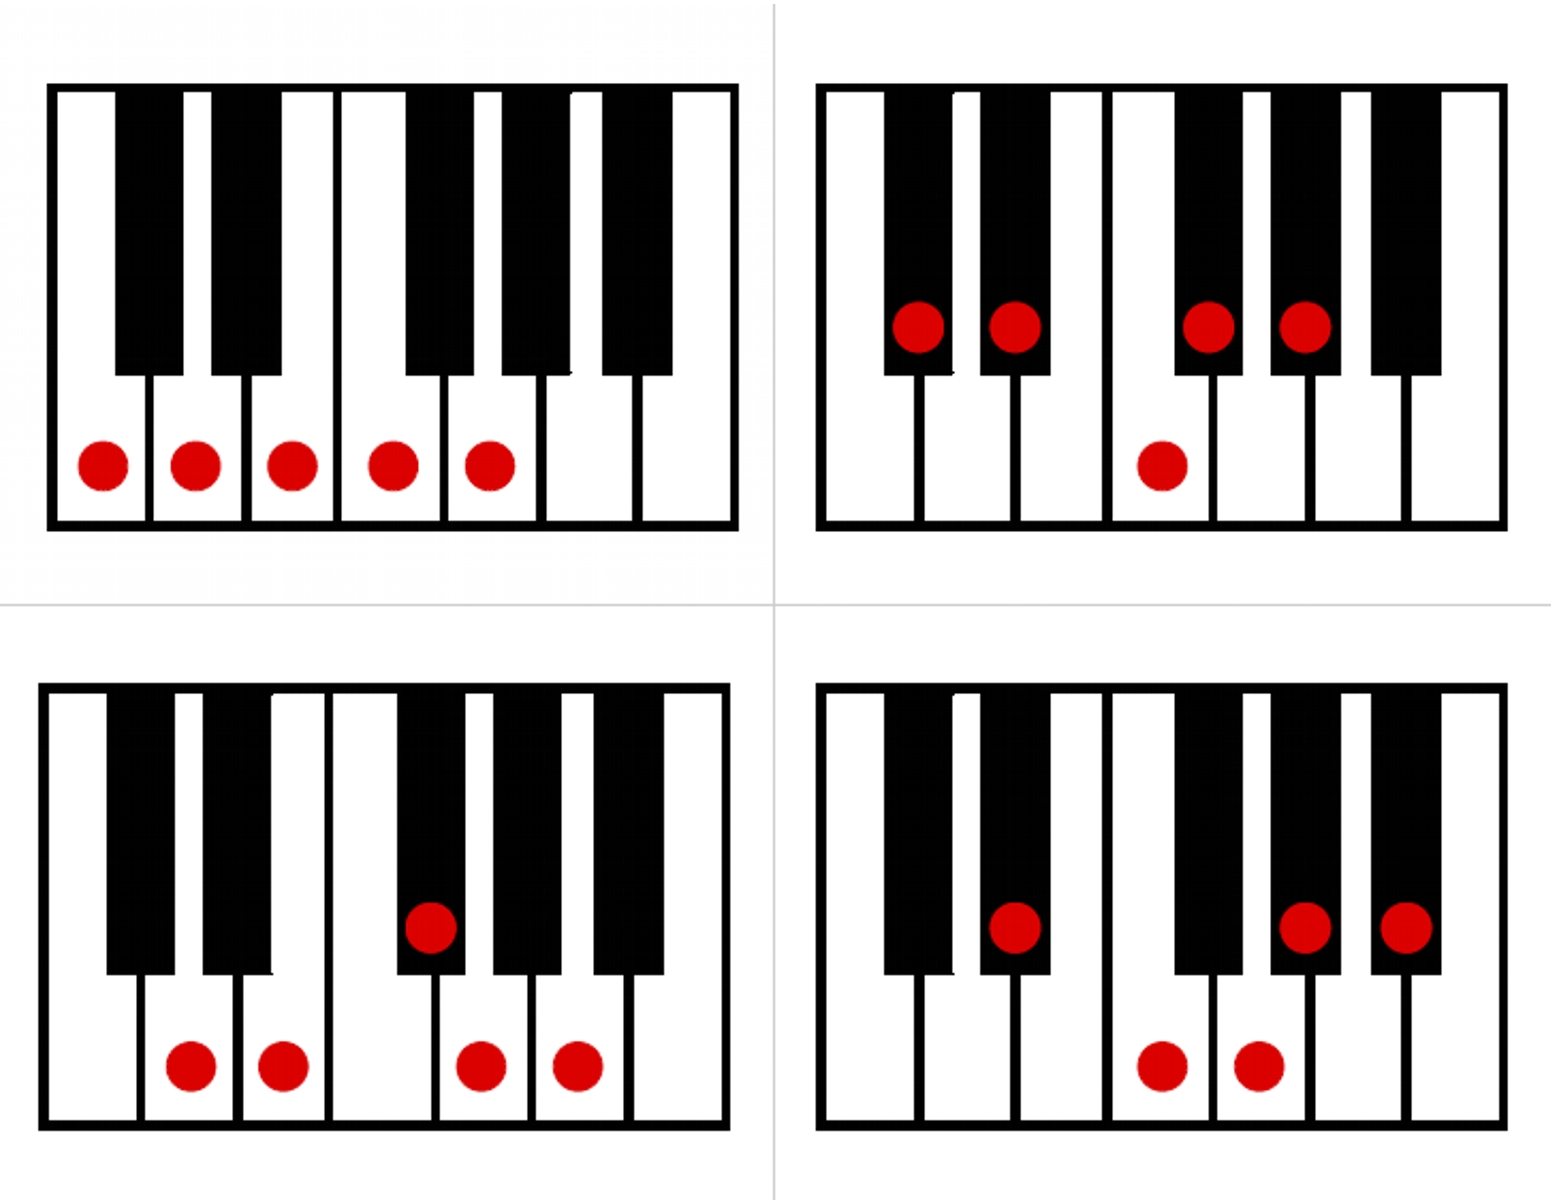 Chords and Keys | Layton Music Games and Resources